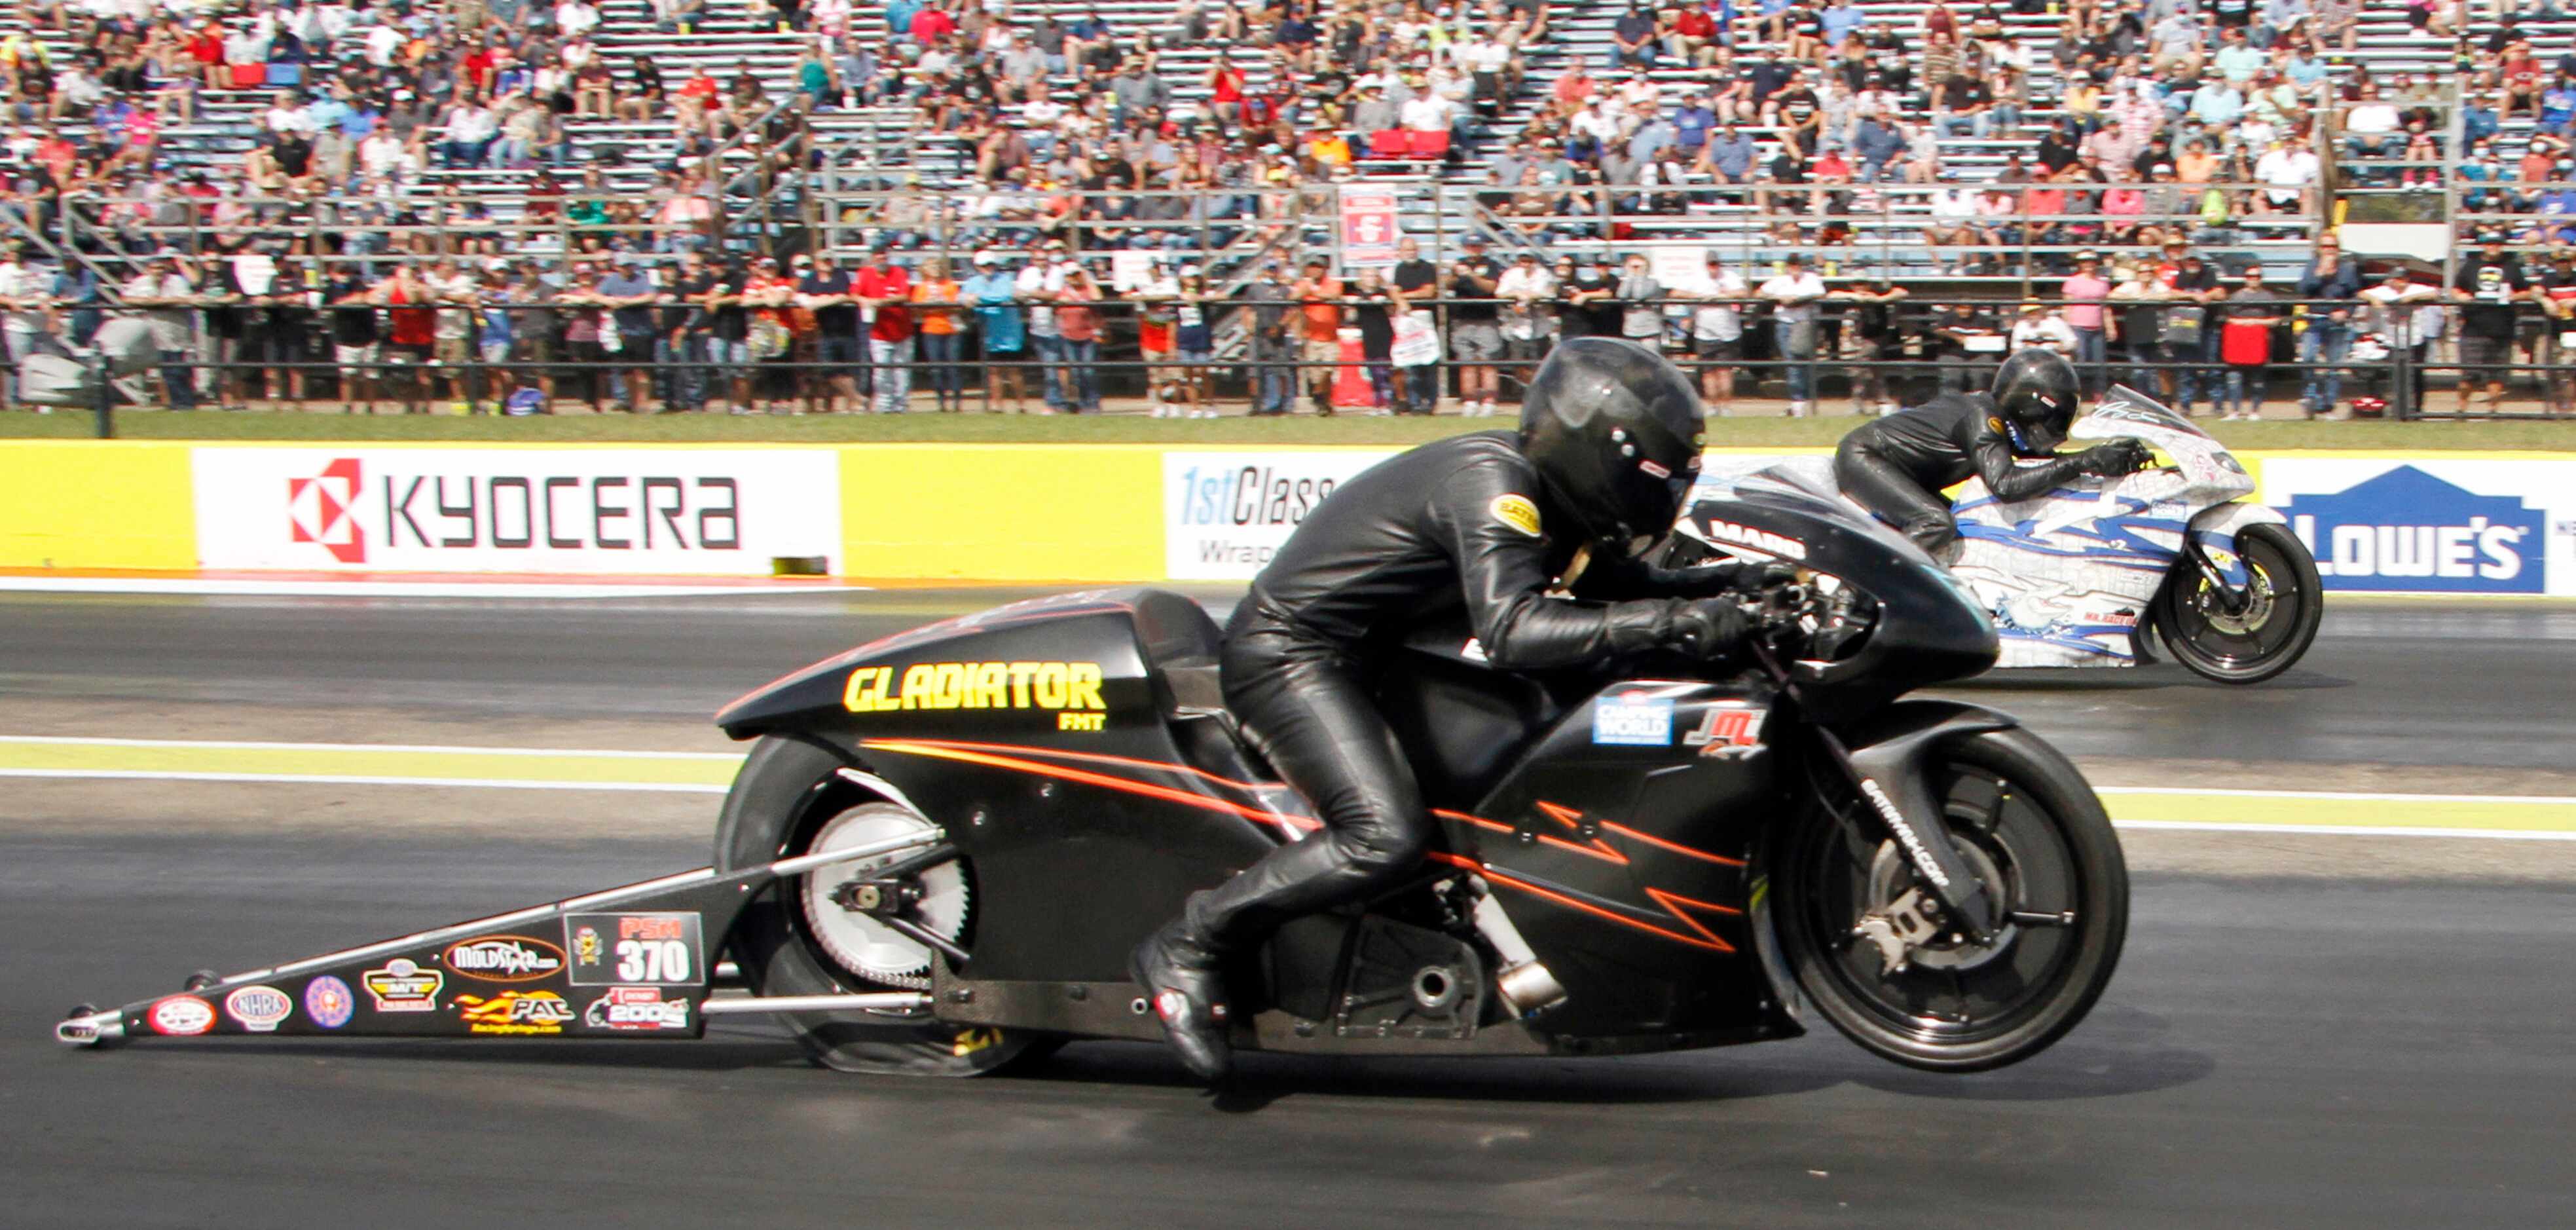 M. Ingwersen ( foreground) competes against J. Savoie (2) during the Pro Stock Motorcycle...